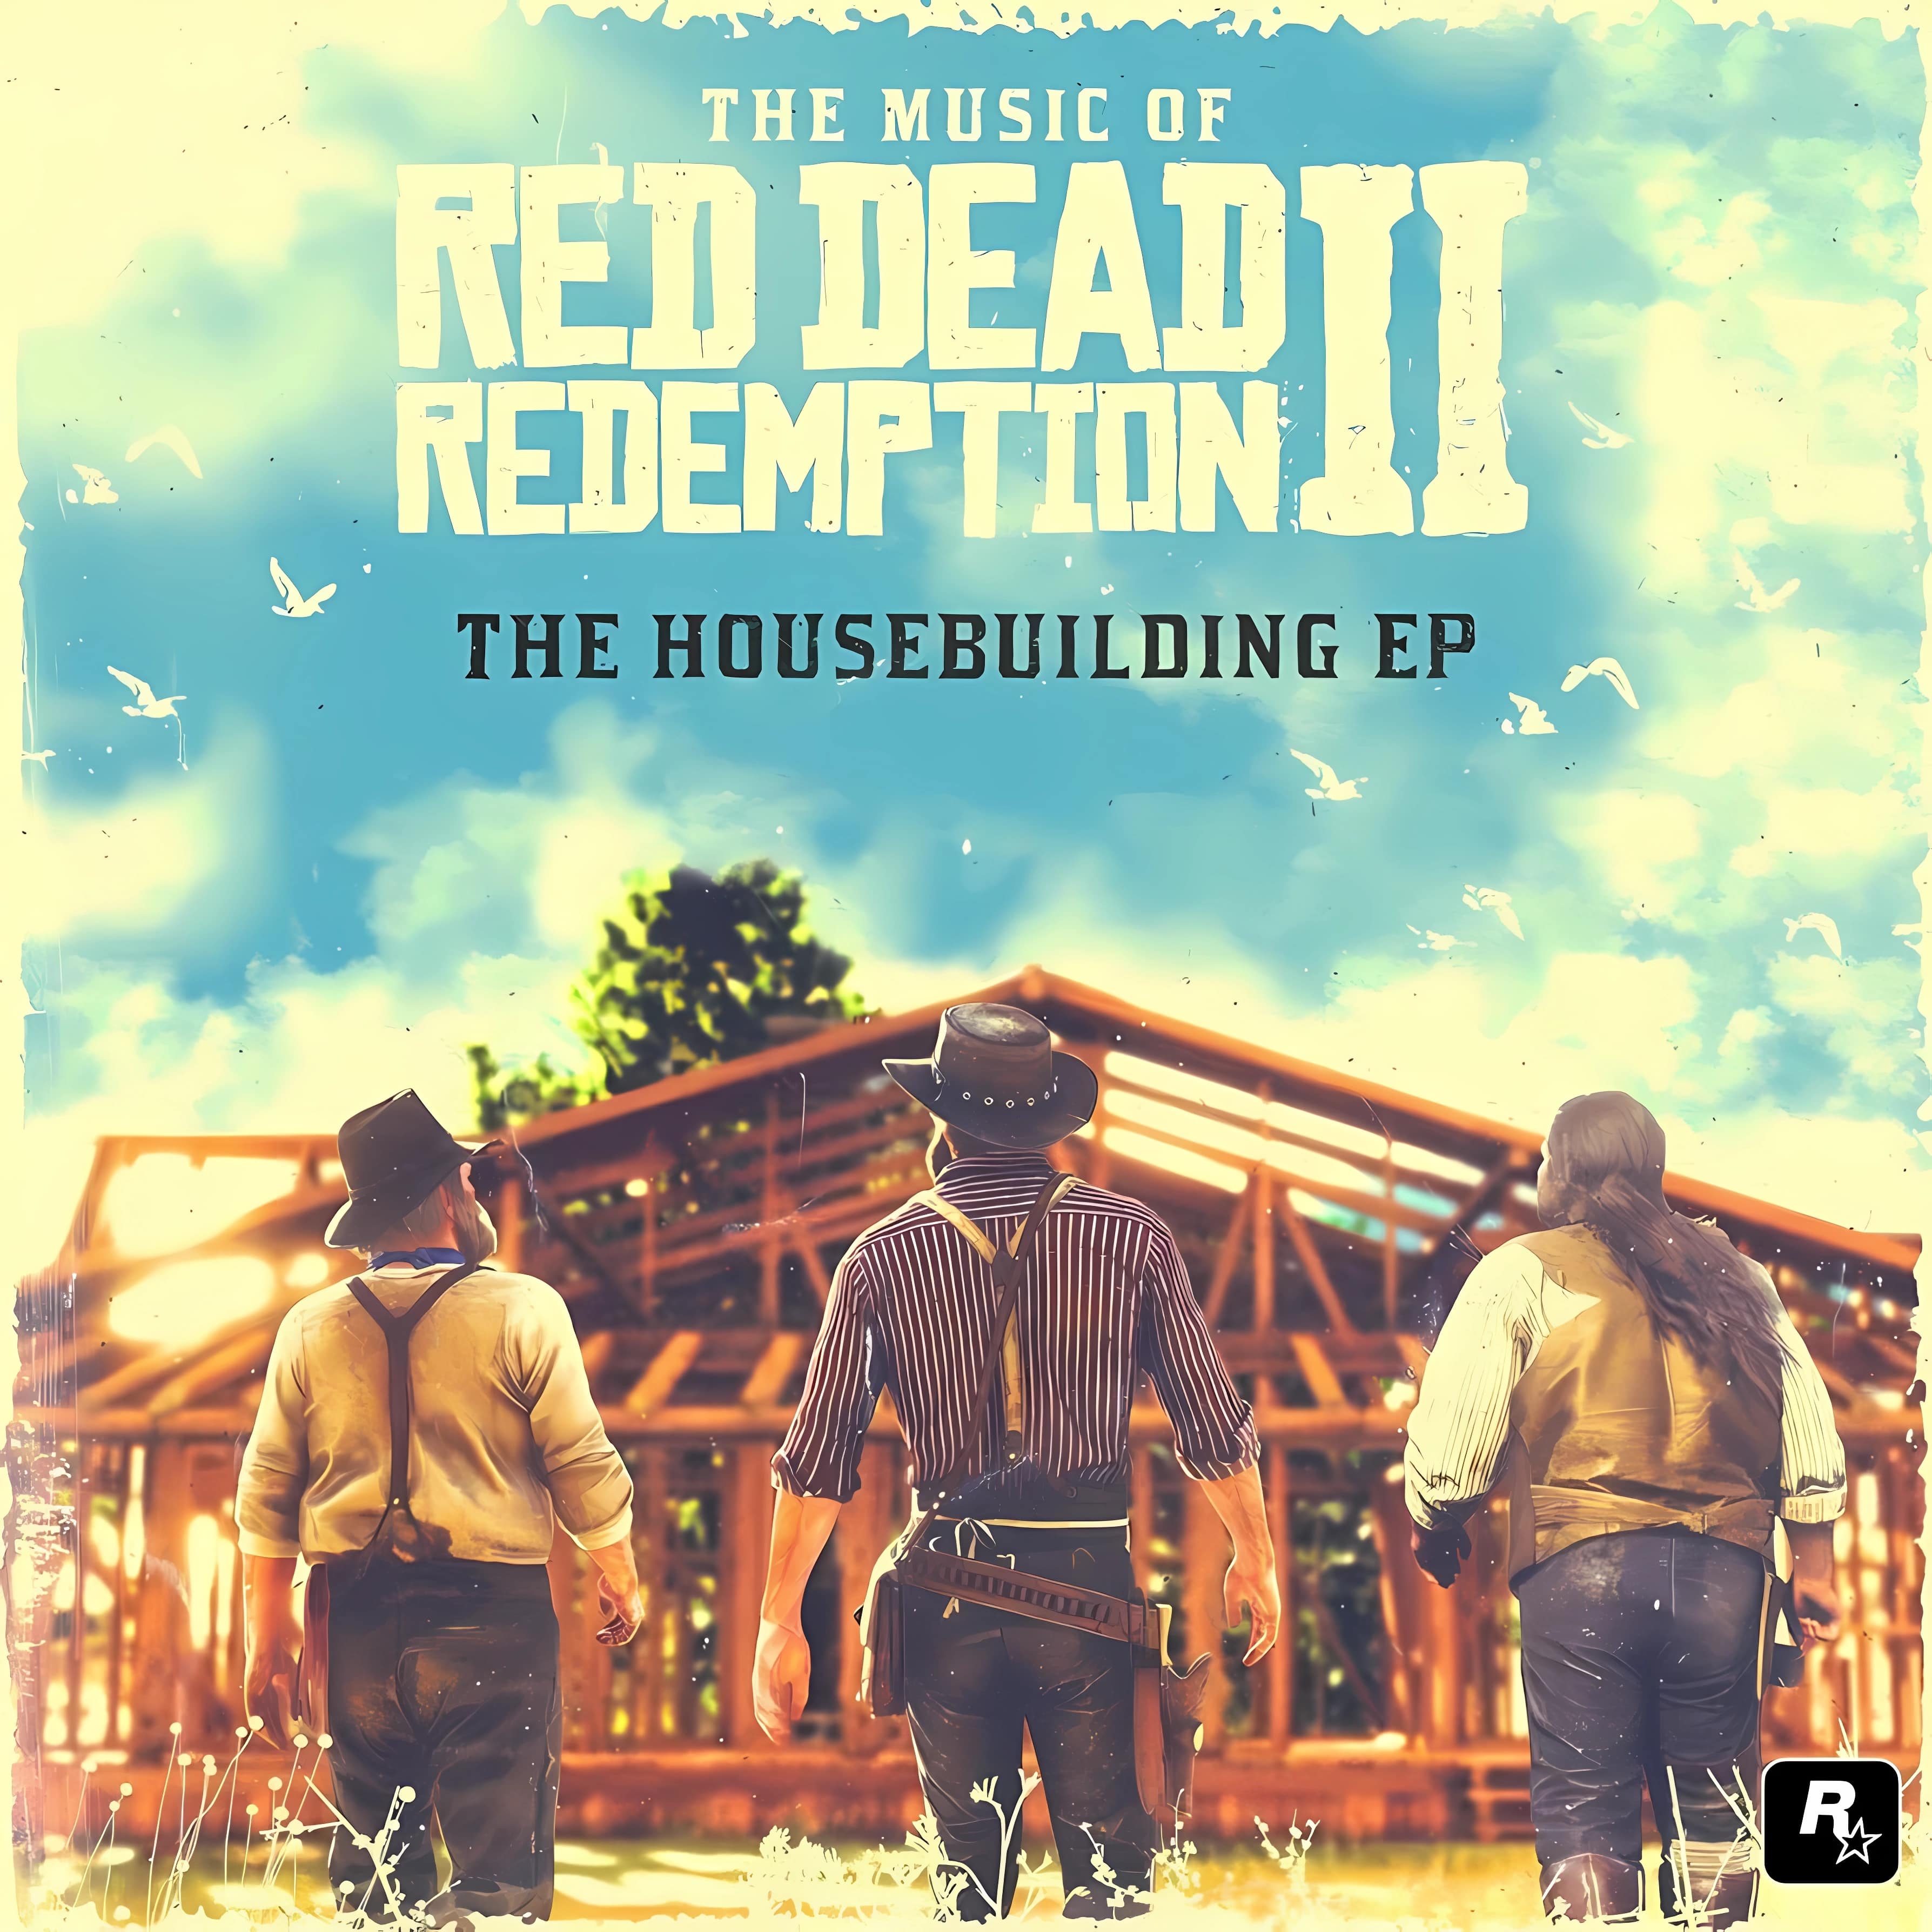 The Music of Red Dead Redemption 2: The Housebuilding EP | Digital Music